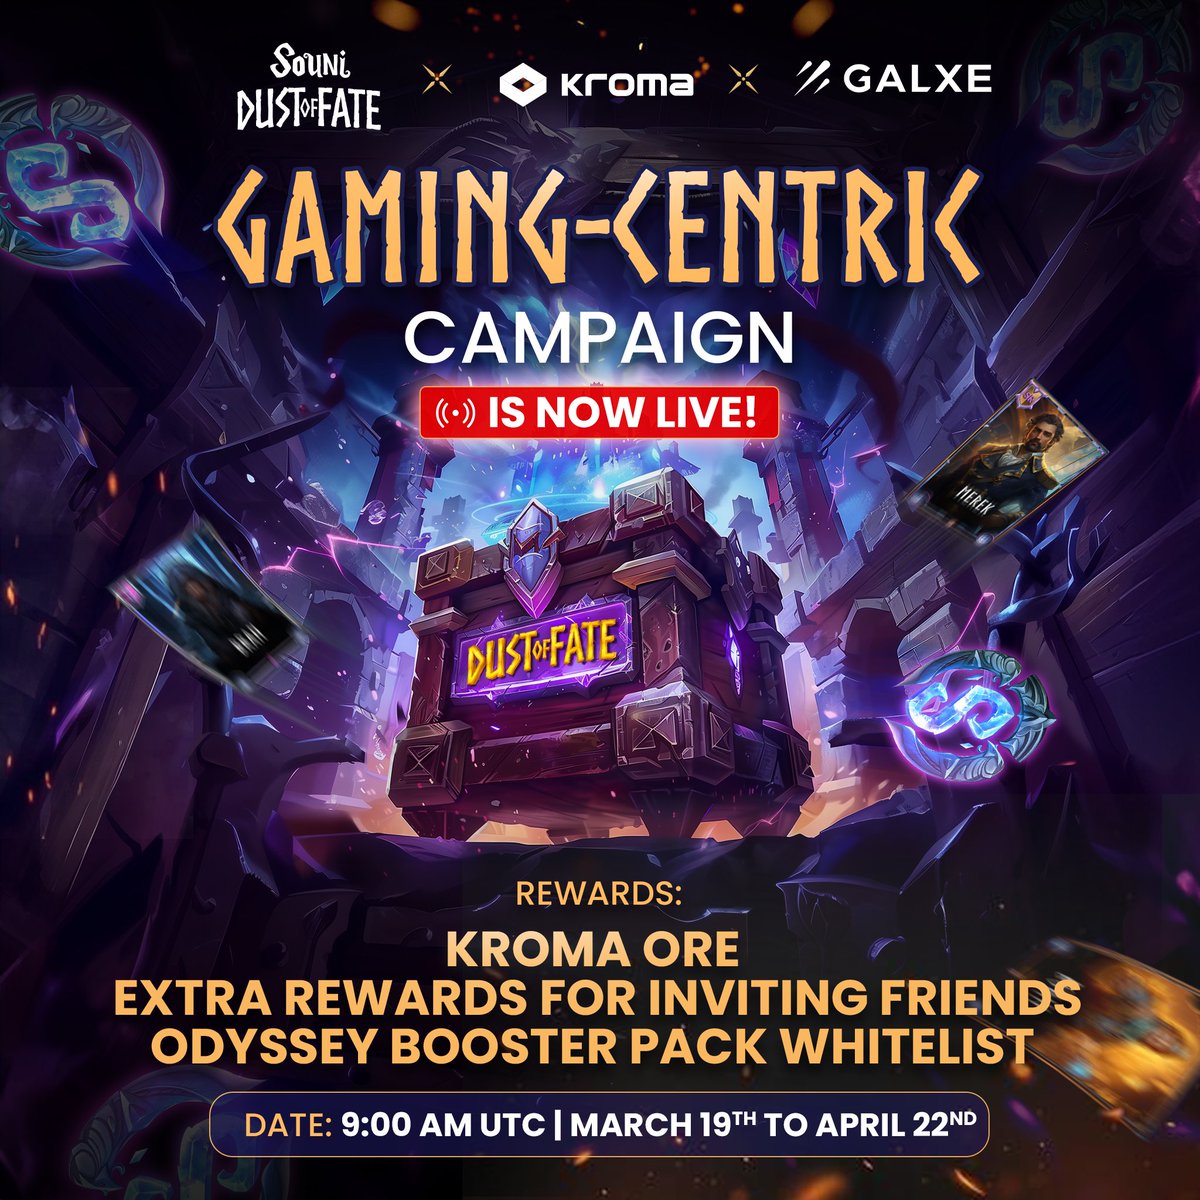 🚀 NOW LIVE: JOIN #SOUNI DUST OF FATE x KROMA x GALXE CAMPAIGN! 📣 💥 Prepare for the epic launch of Dust Of Fate TCG game, we're teaming up with @kroma_network for a gaming-centric campaign on @Galxe, packin' HUGE rewards. 🔗 Jump in NOW: galxe.com/kroma/campaign… ⏰ Duration: